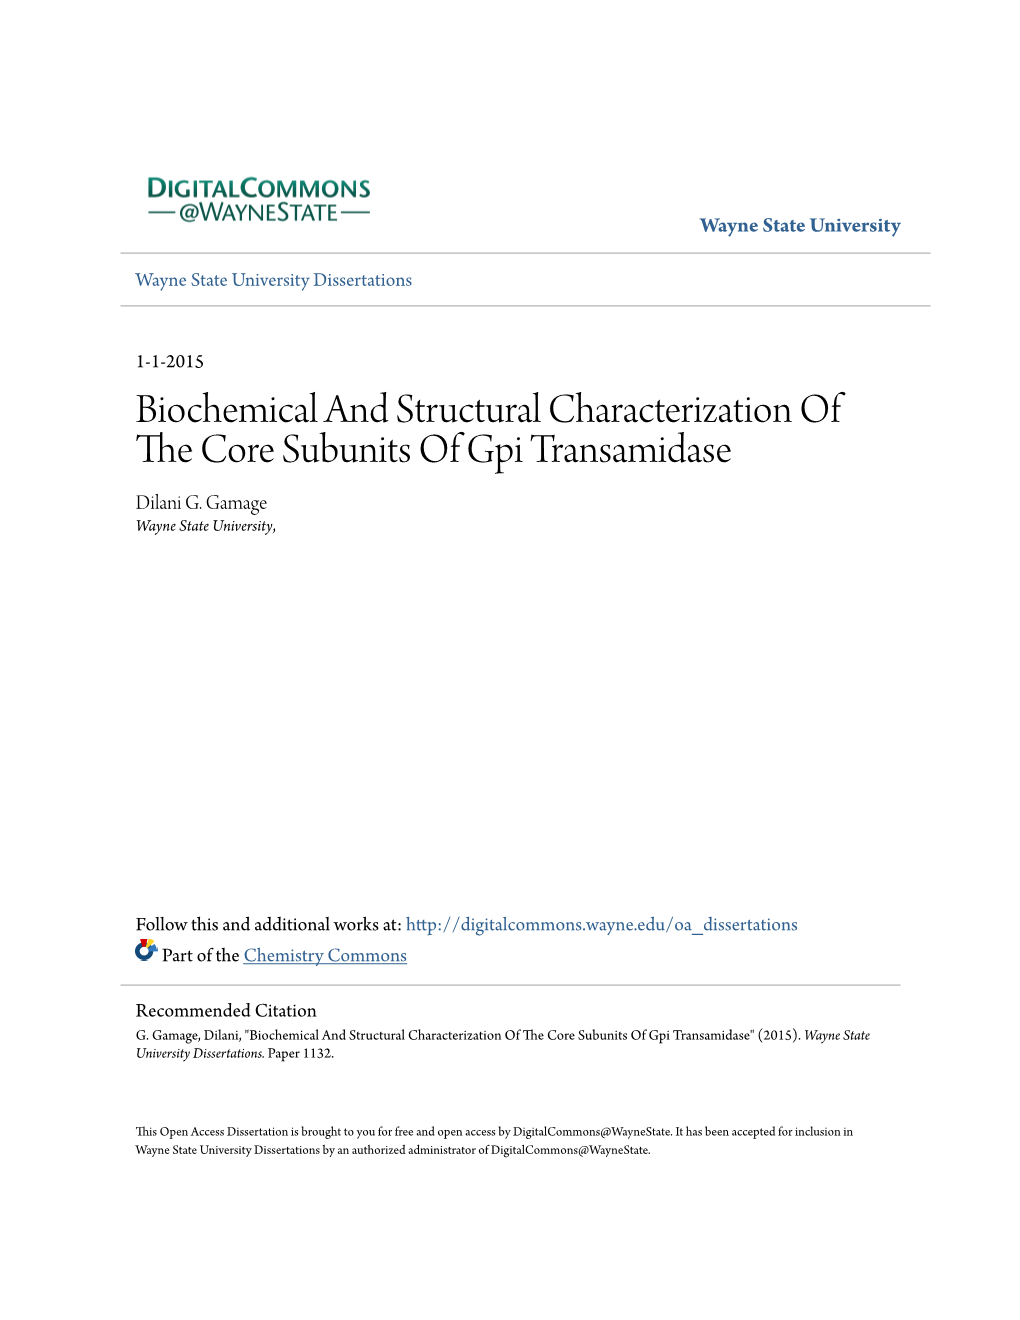 Biochemical and Structural Characterization of the Core Subunits of Gpi Transamidase